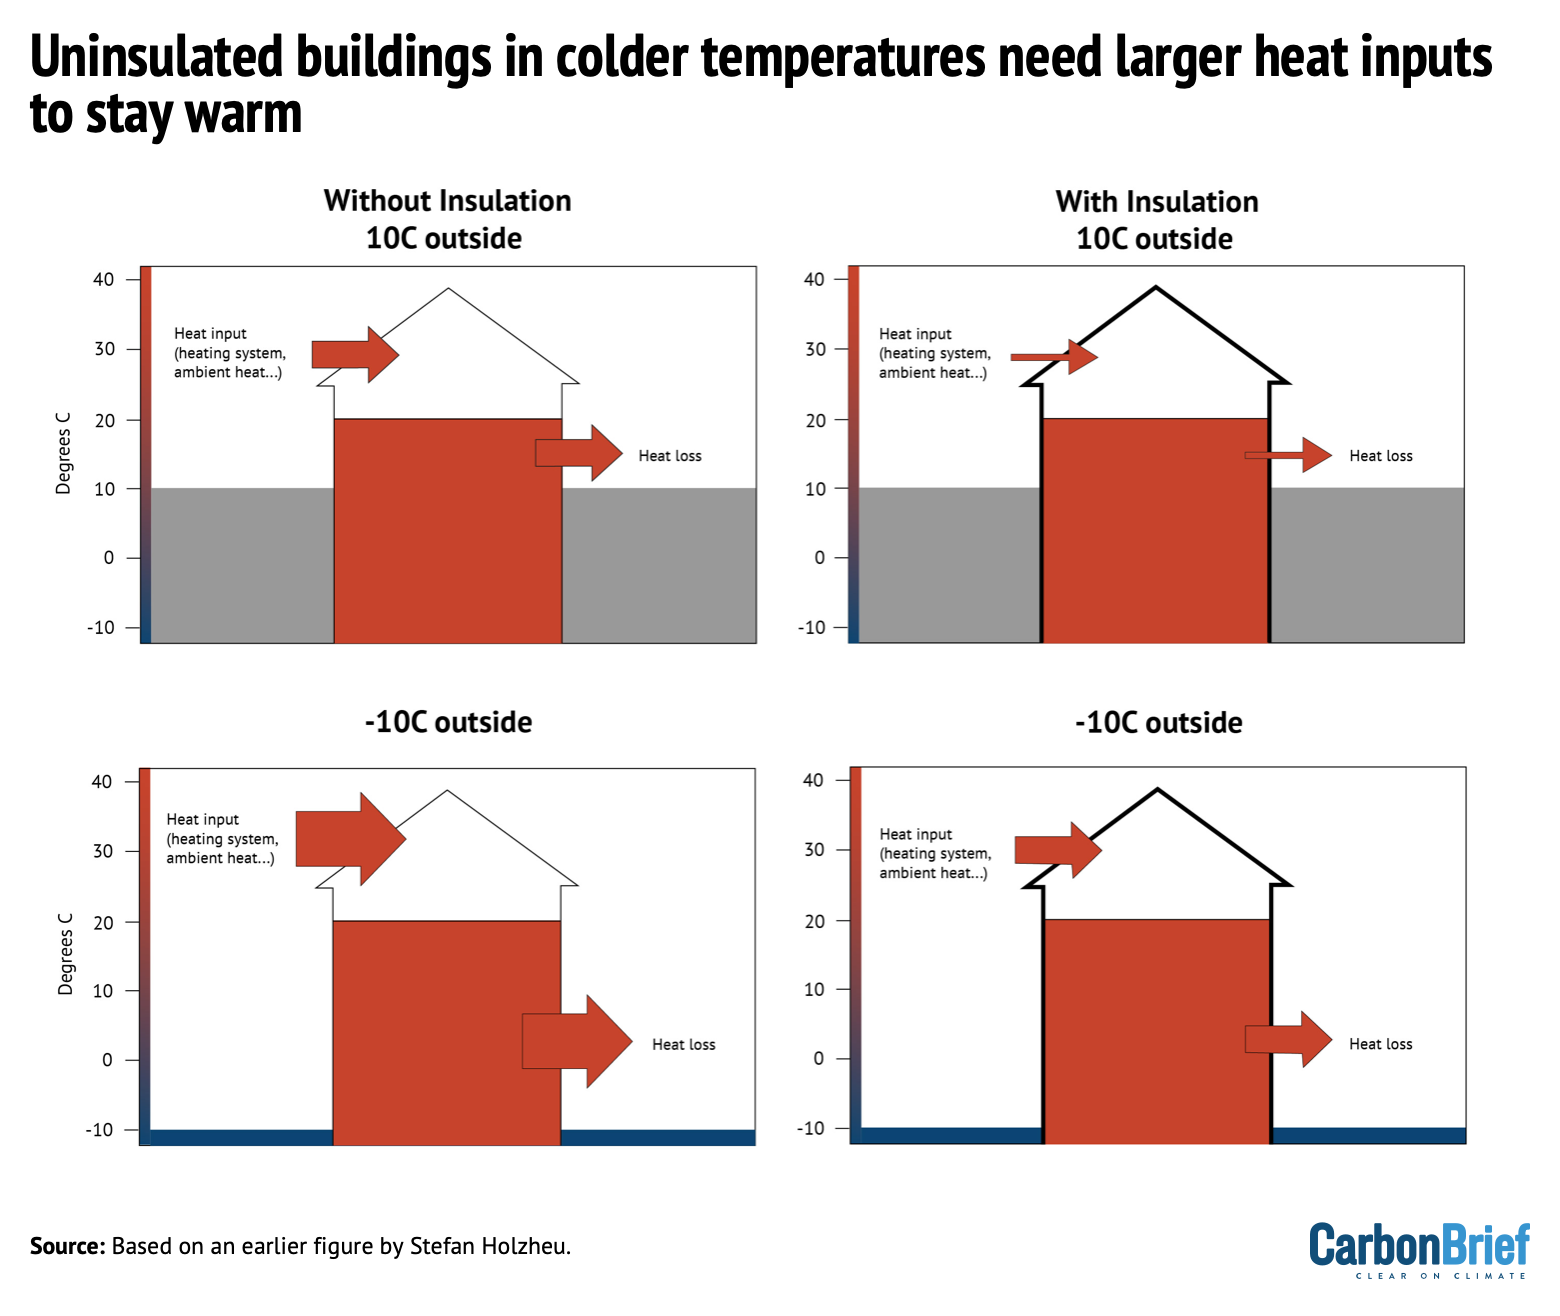 Uninsulated buildings in colder temperatures need larger heat inputs to stay warm